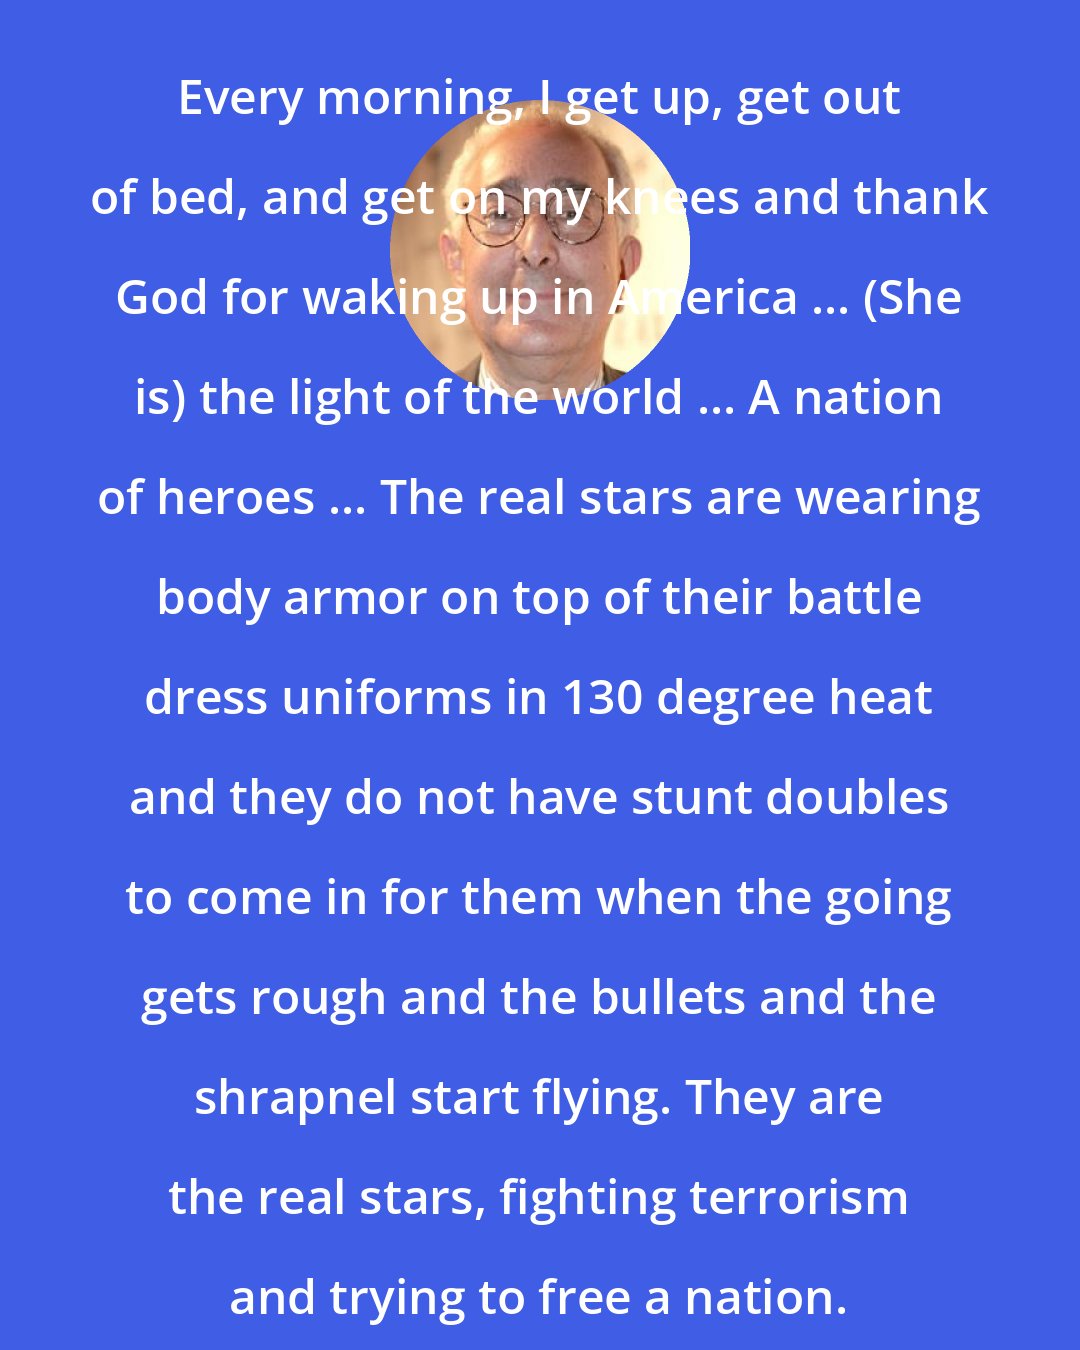 Ben Stein: Every morning, I get up, get out of bed, and get on my knees and thank God for waking up in America ... (She is) the light of the world ... A nation of heroes ... The real stars are wearing body armor on top of their battle dress uniforms in 130 degree heat and they do not have stunt doubles to come in for them when the going gets rough and the bullets and the shrapnel start flying. They are the real stars, fighting terrorism and trying to free a nation.